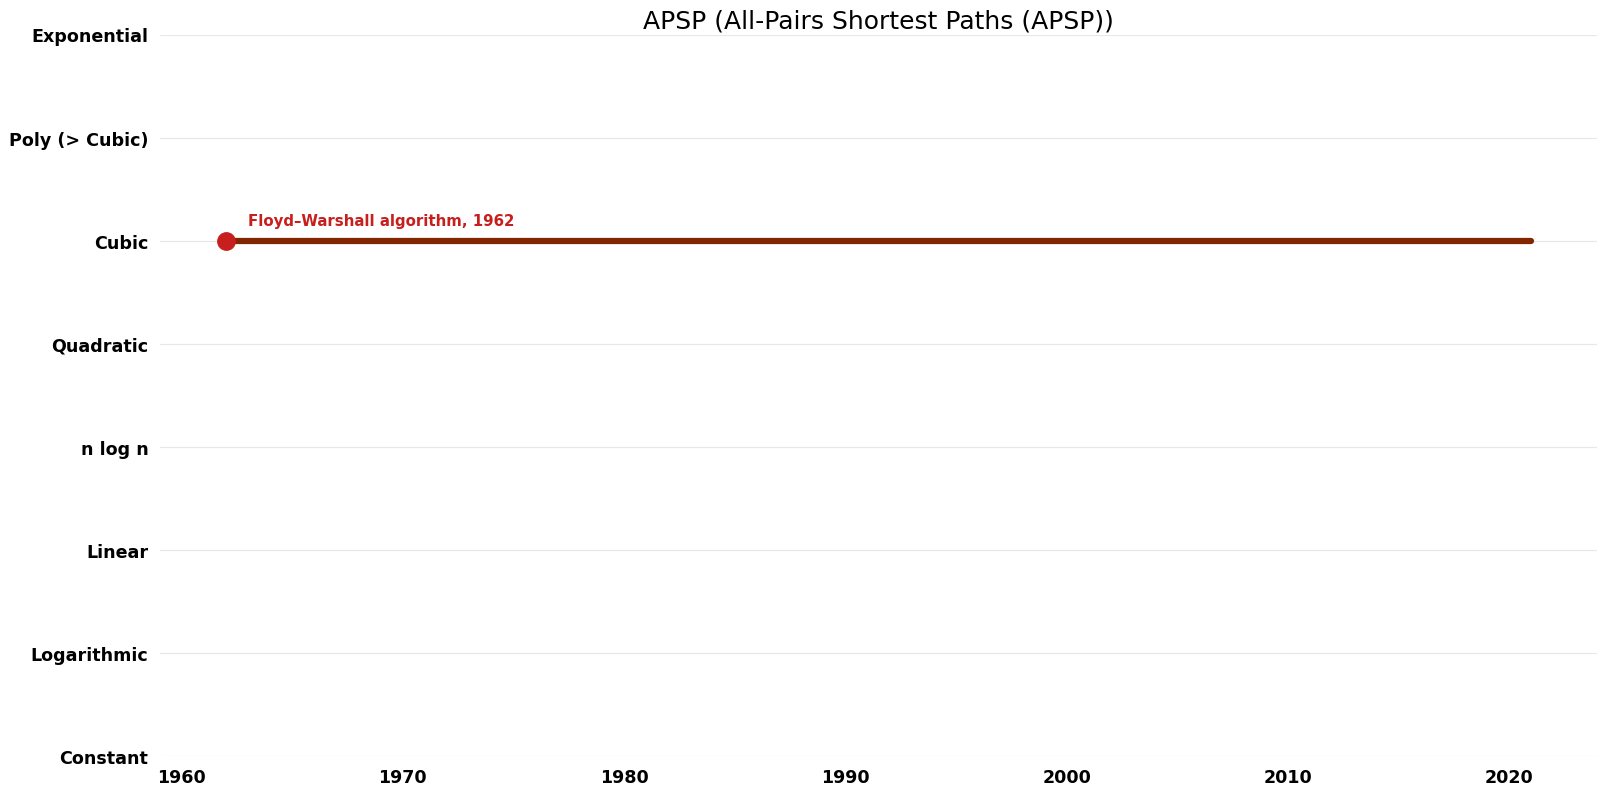 All-Pairs Shortest Paths (APSP) - APSP - Time.png